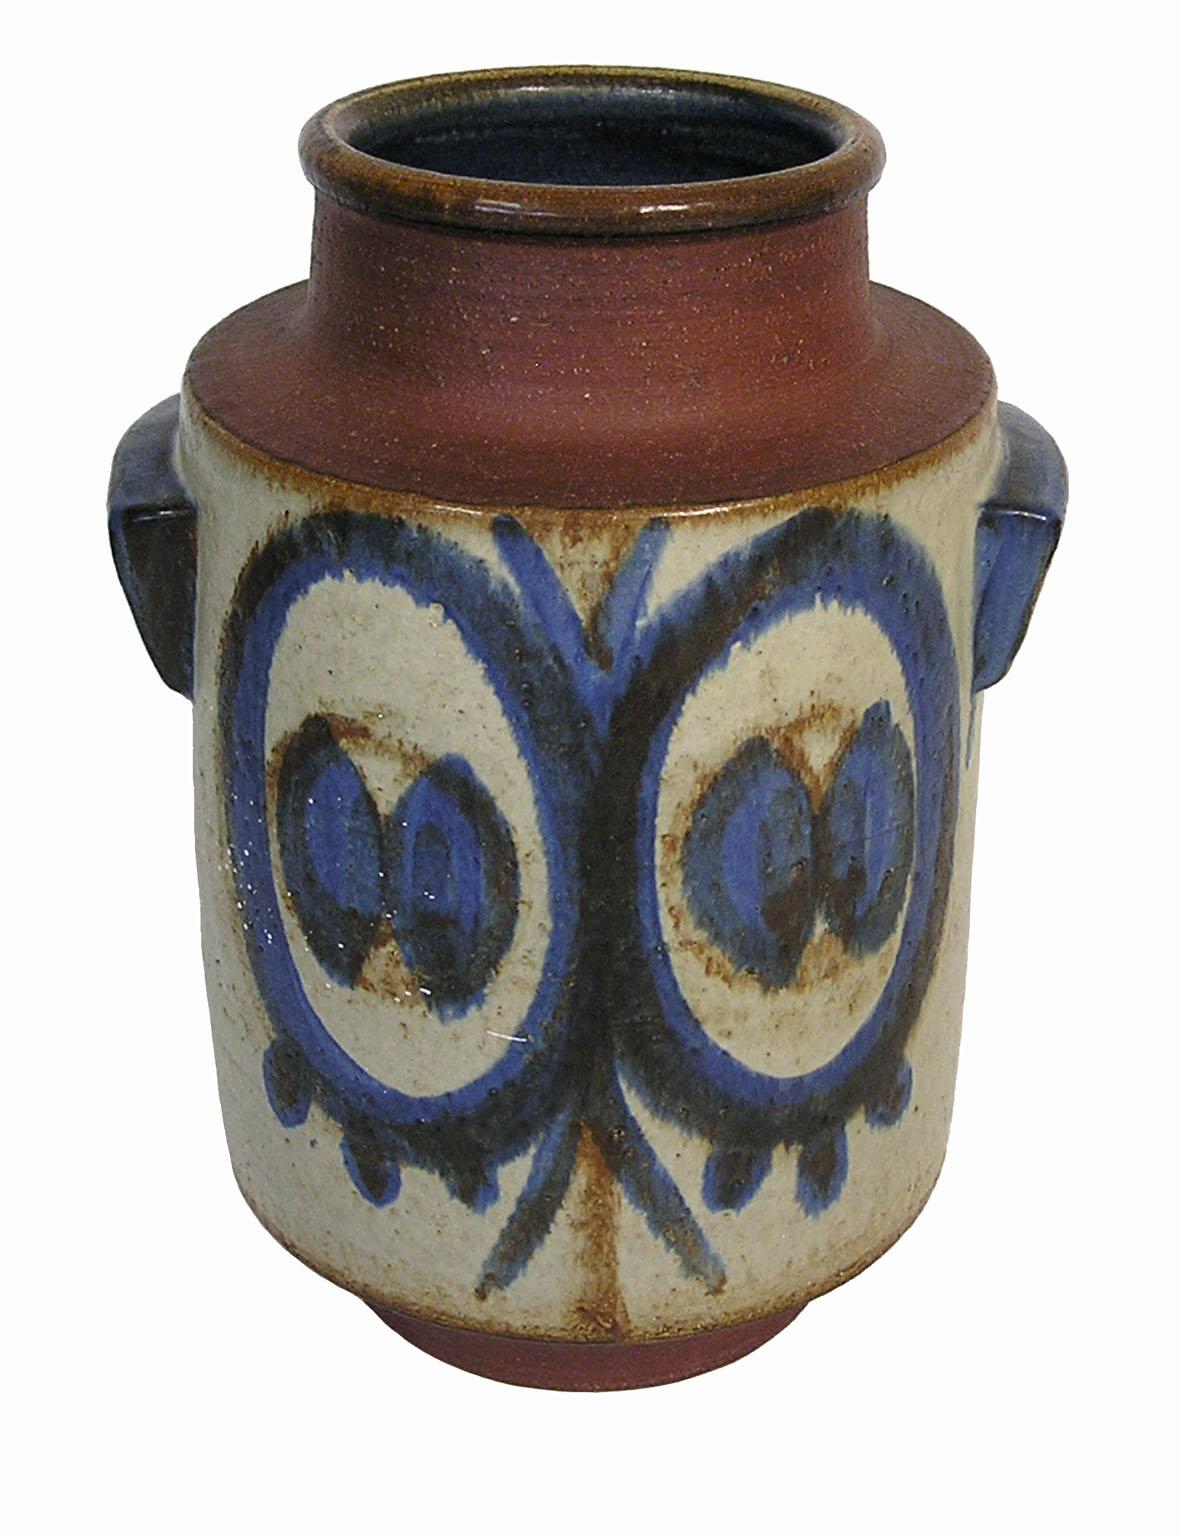 A large pottery planter/vase from the 1960s designed by Svend Aage Jensen for Soholm of Denmark. Uniquely crafted with handles to either side and featuring a neutral earthtone base glaze decorated in a blue and brown hand-painted design. Very good